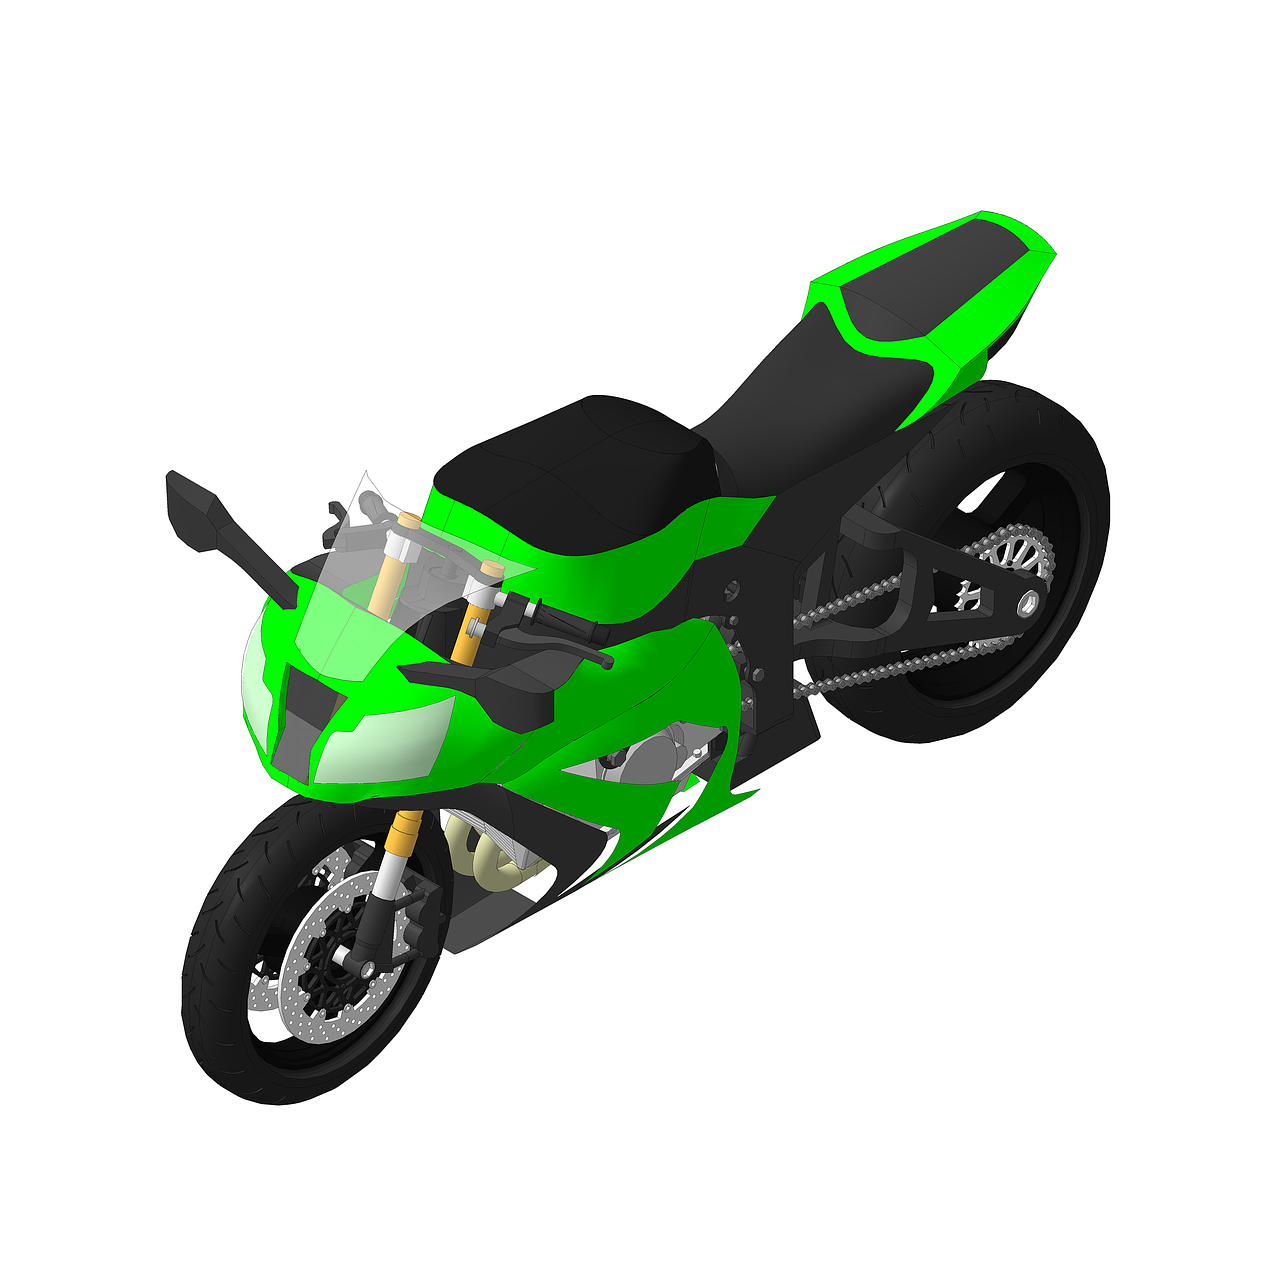 modeling 3d motorcycle free photo